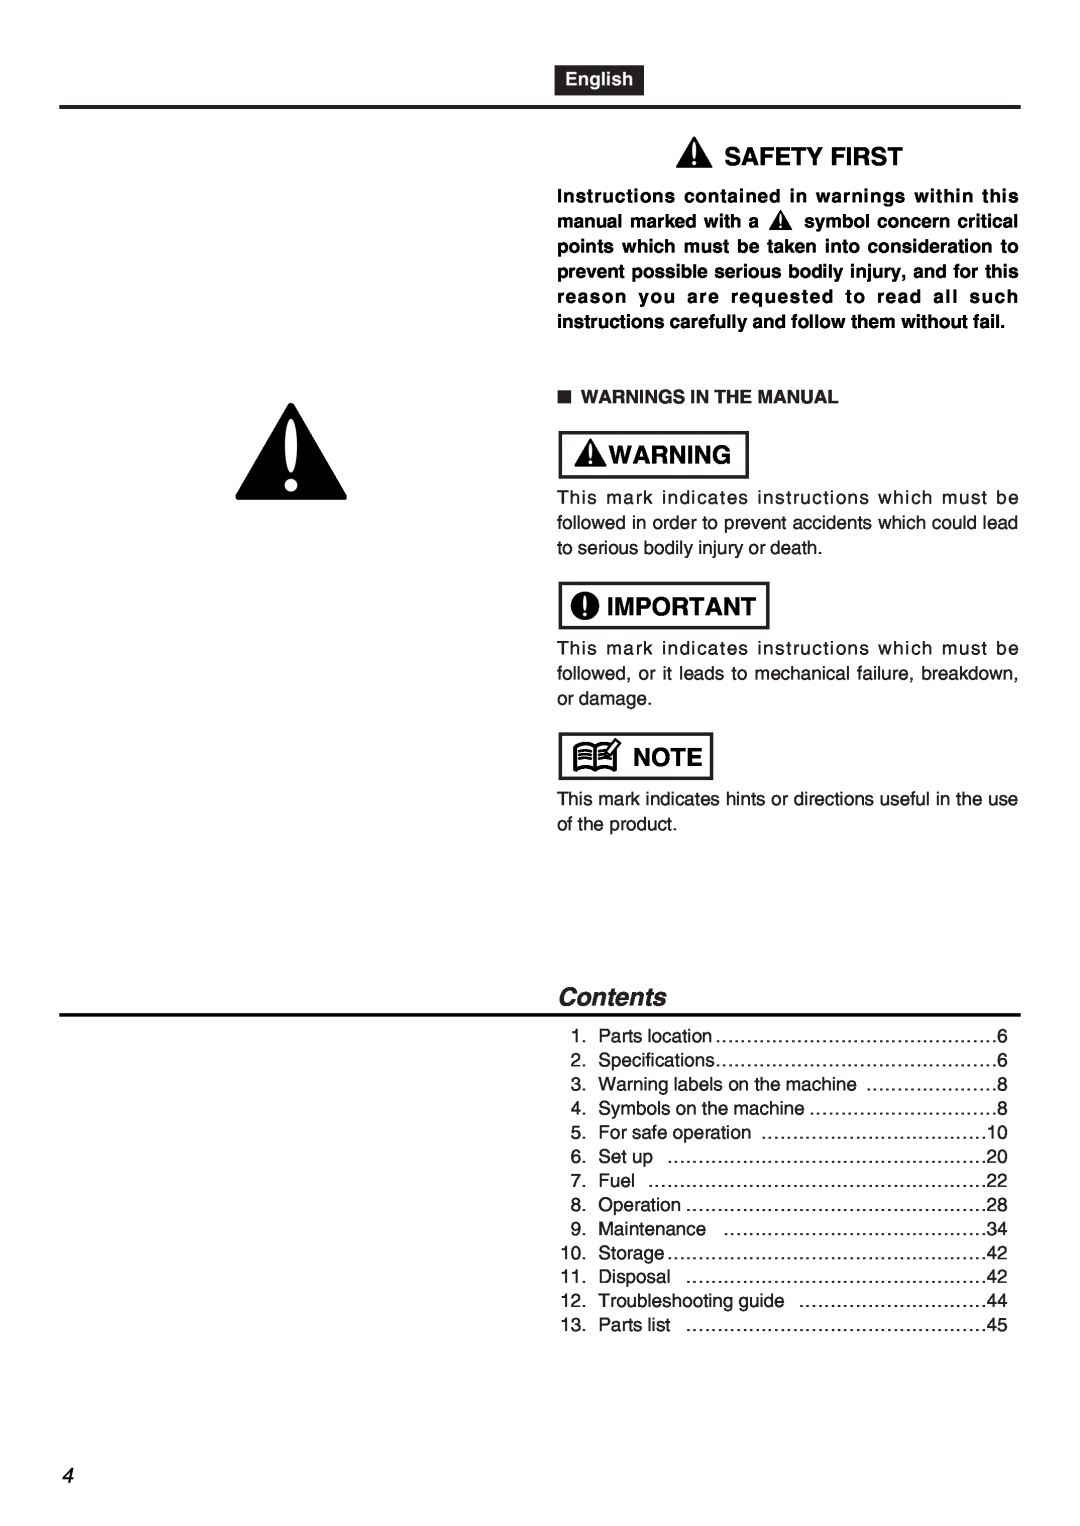 Univex SRTZ2401-CA manual Safety First, Contents, English 